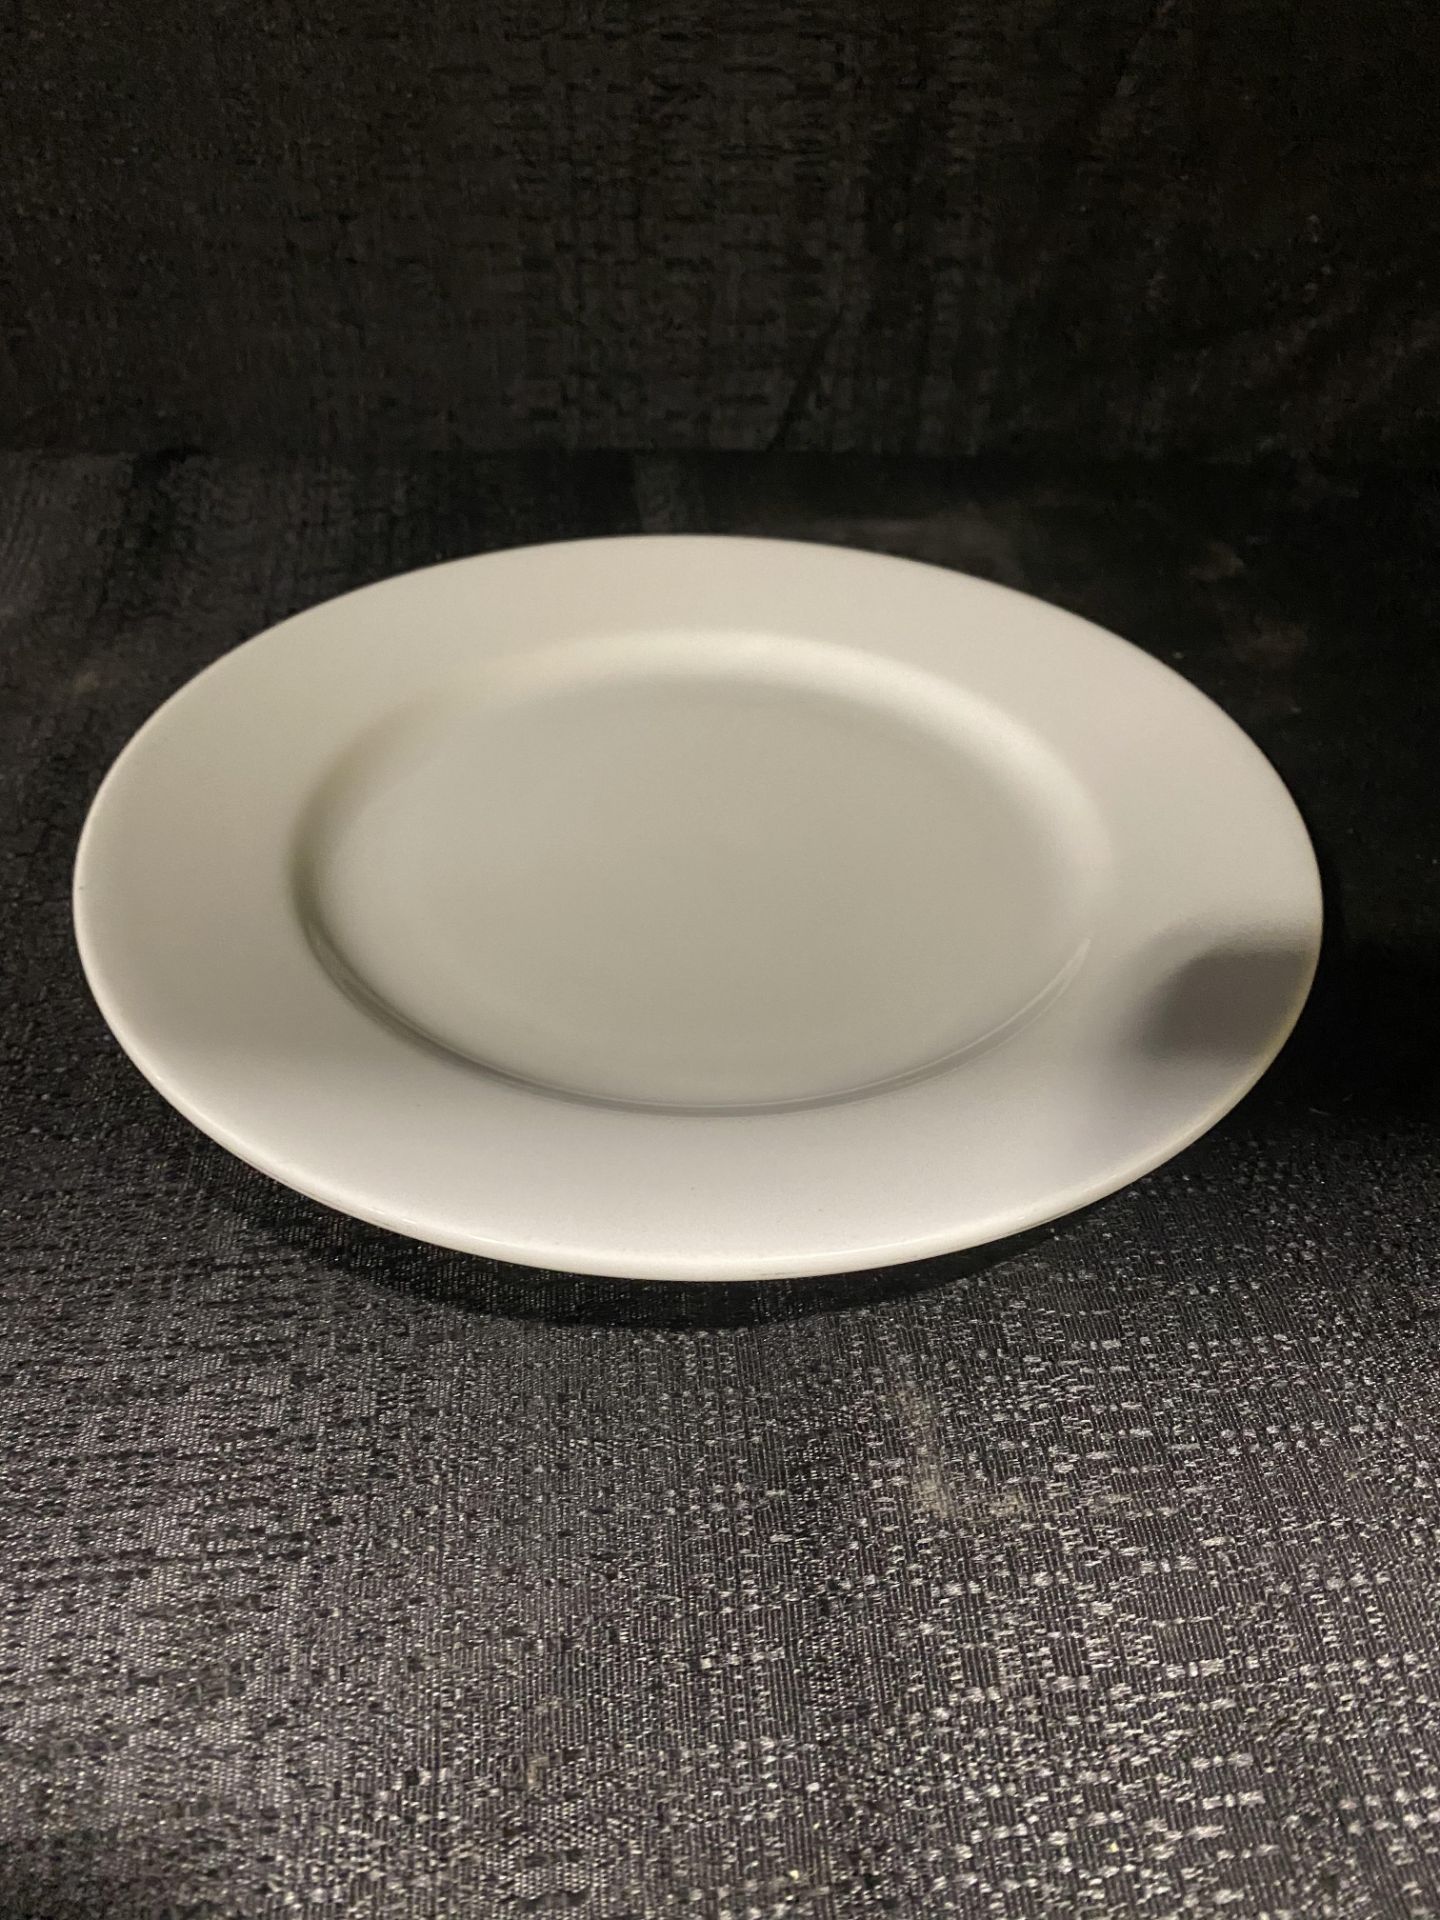 (50) 9.5" Salad/Dessert Plates White China Sant Andrea (BRING PACKING MATERIAL)